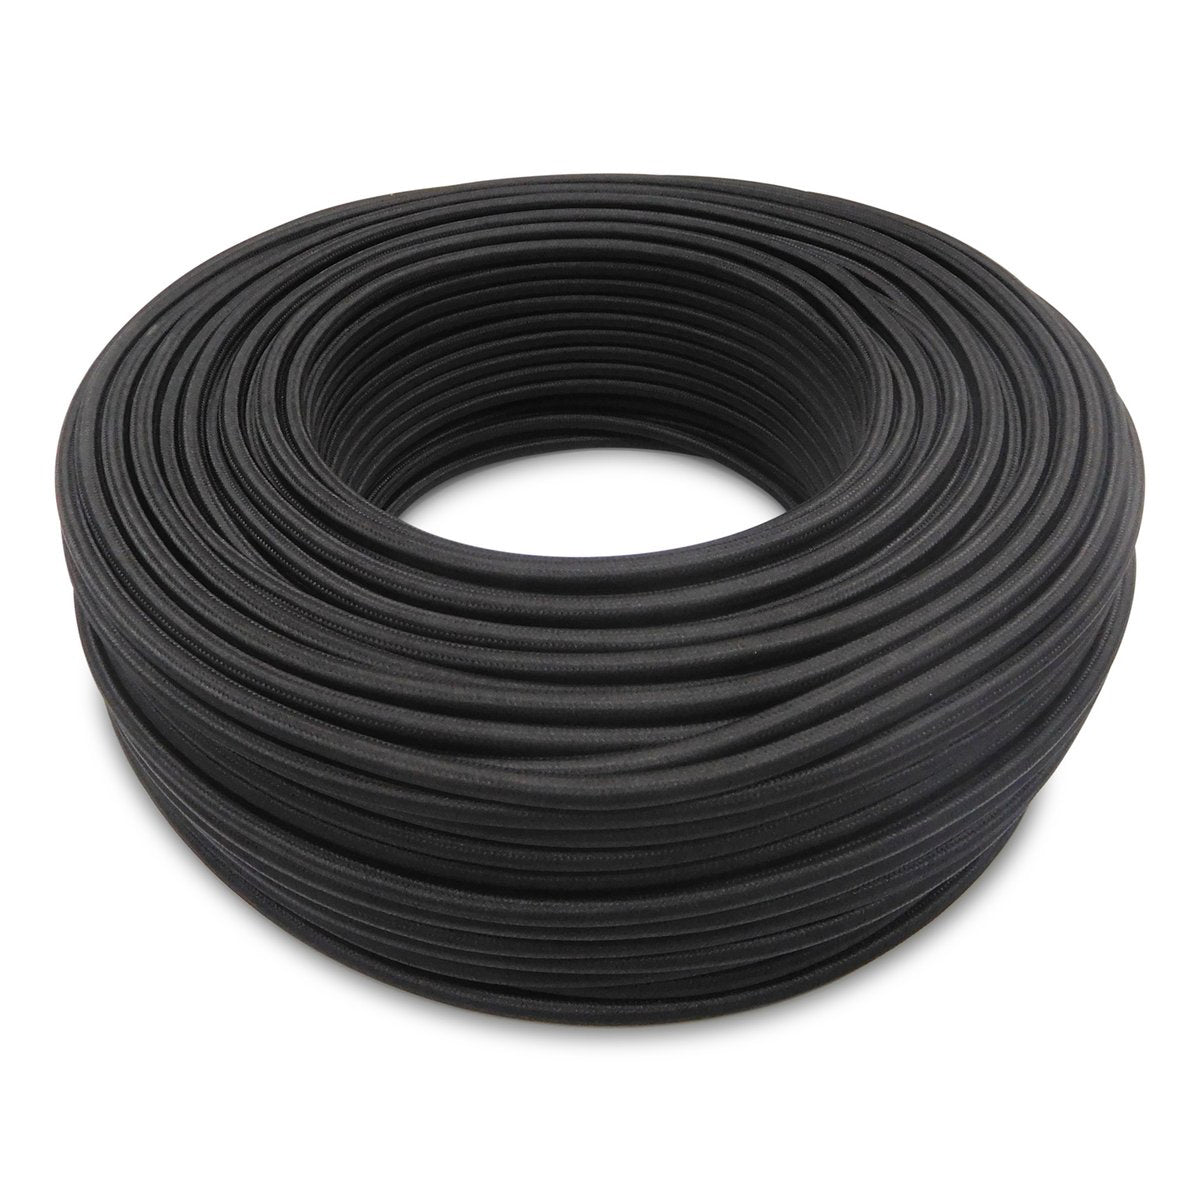 3-Core Round Cable in black.JPG